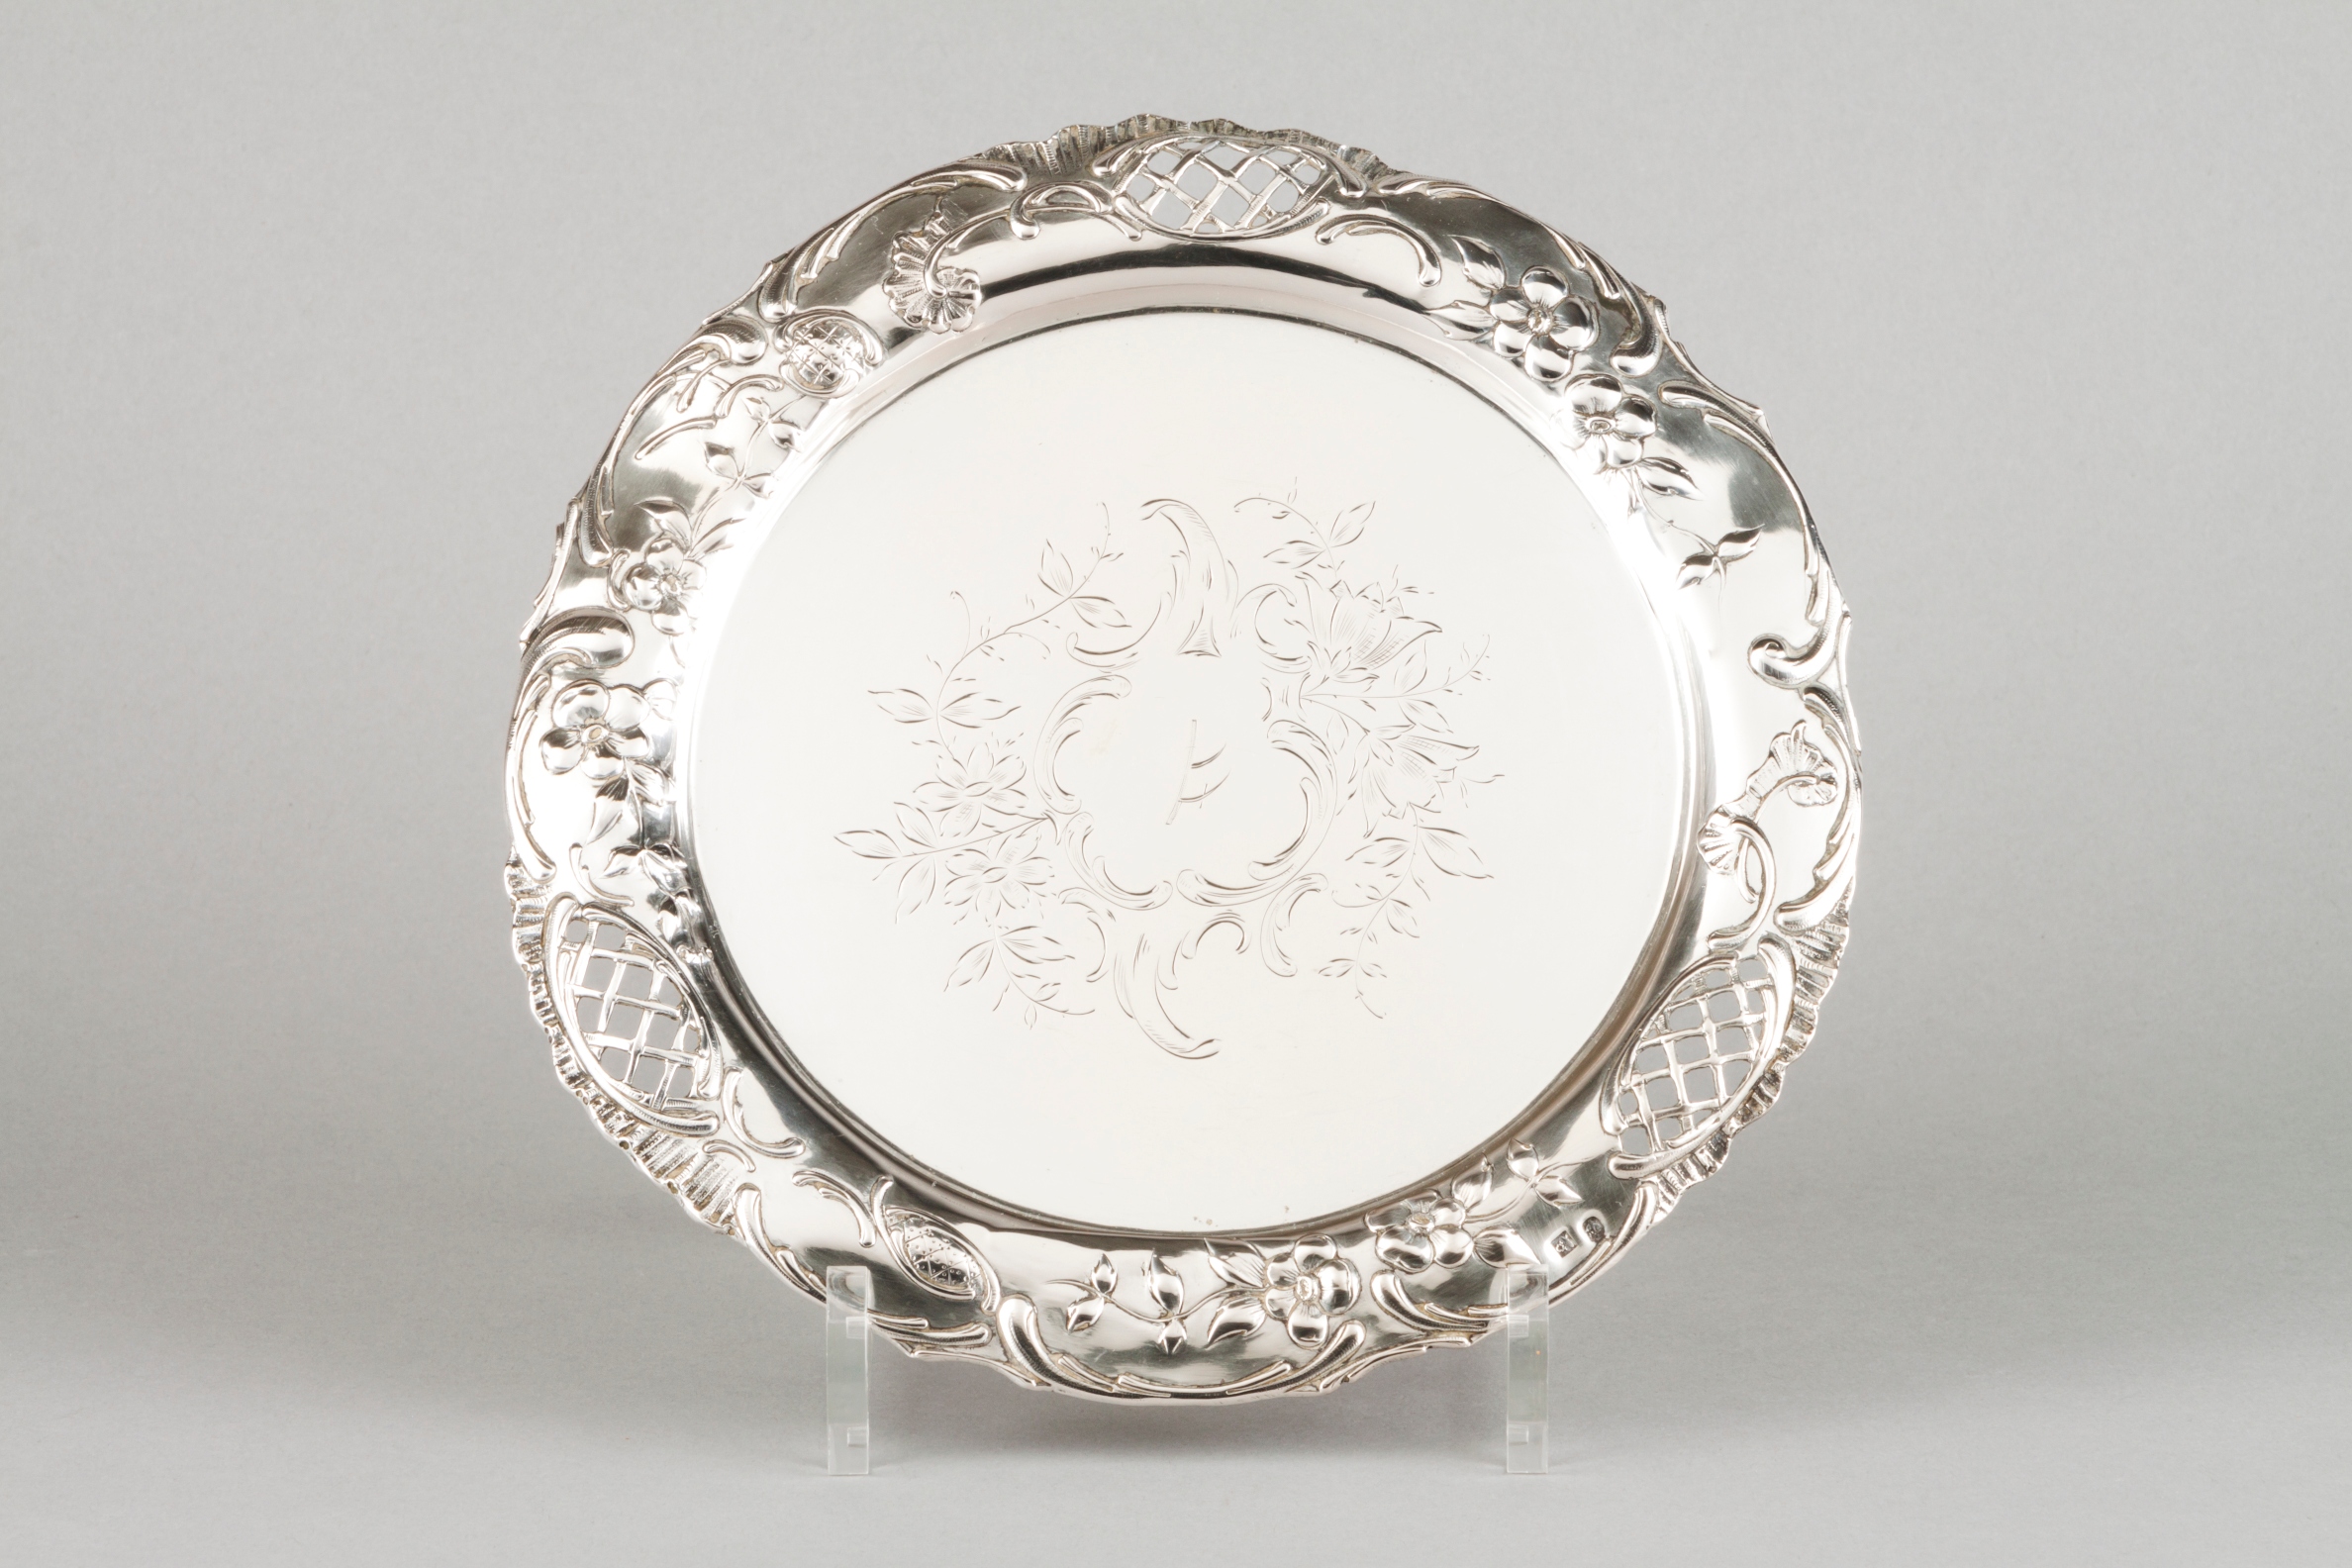 A salverPortuguese silver Central chiselled floral decoration with part pierced lip of raised fl